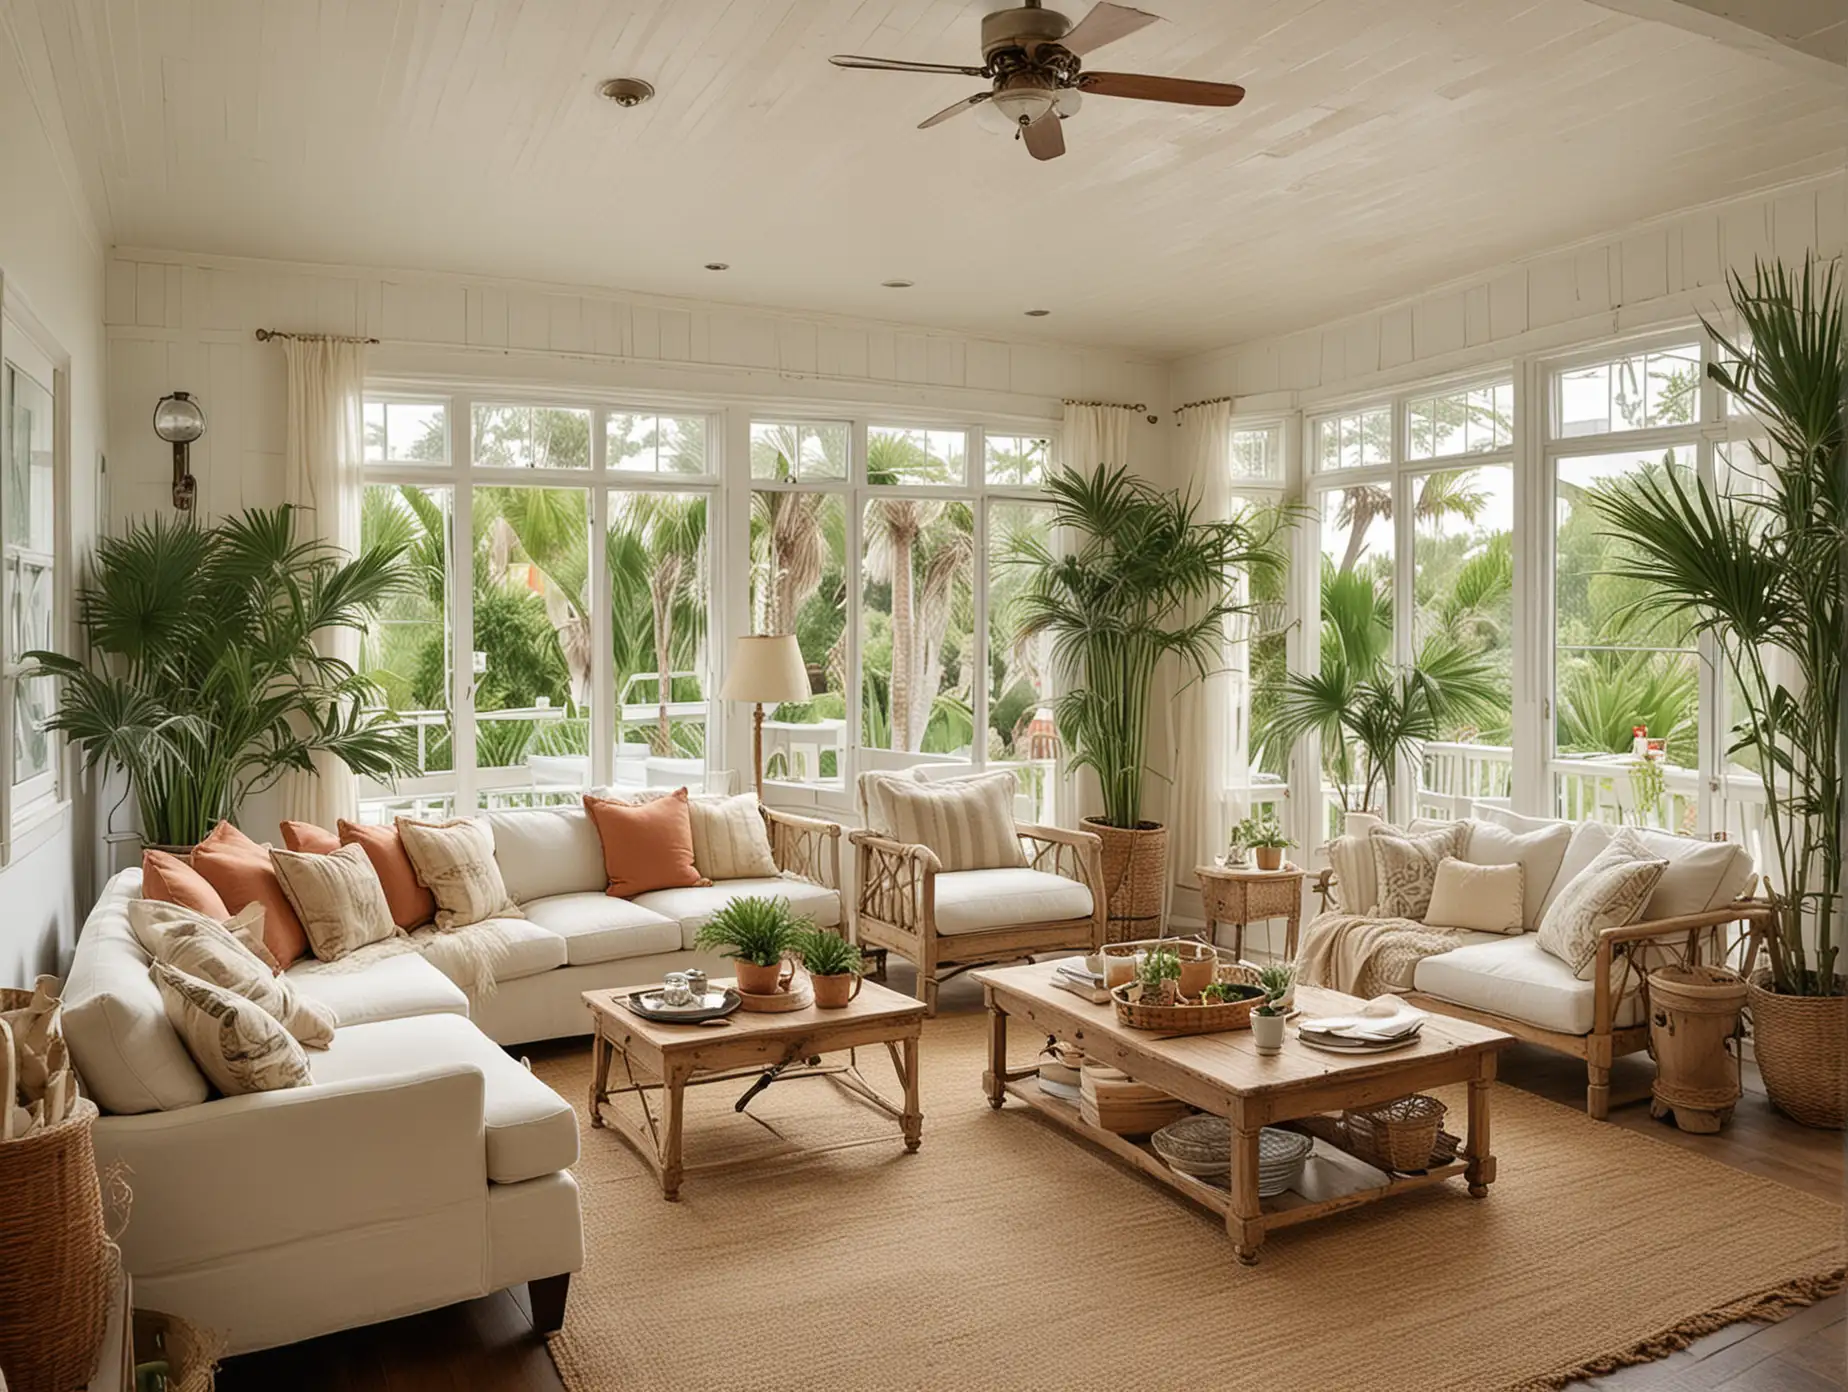 Vintage Sitting Room with Kitchen and Porch Views in a Large Space: Create a vintage-inspired sitting room in a large and spacious setting, with views into both a modern kitchen and a sunny porch. Use wooden furniture and farmhouse decor items like old clocks and credenza. The kitchen should have vintage cabinets and appliances, while the porch should feature potted palm trees and a thatched roof. Add house plants likespider plants and pampas grass indoors.